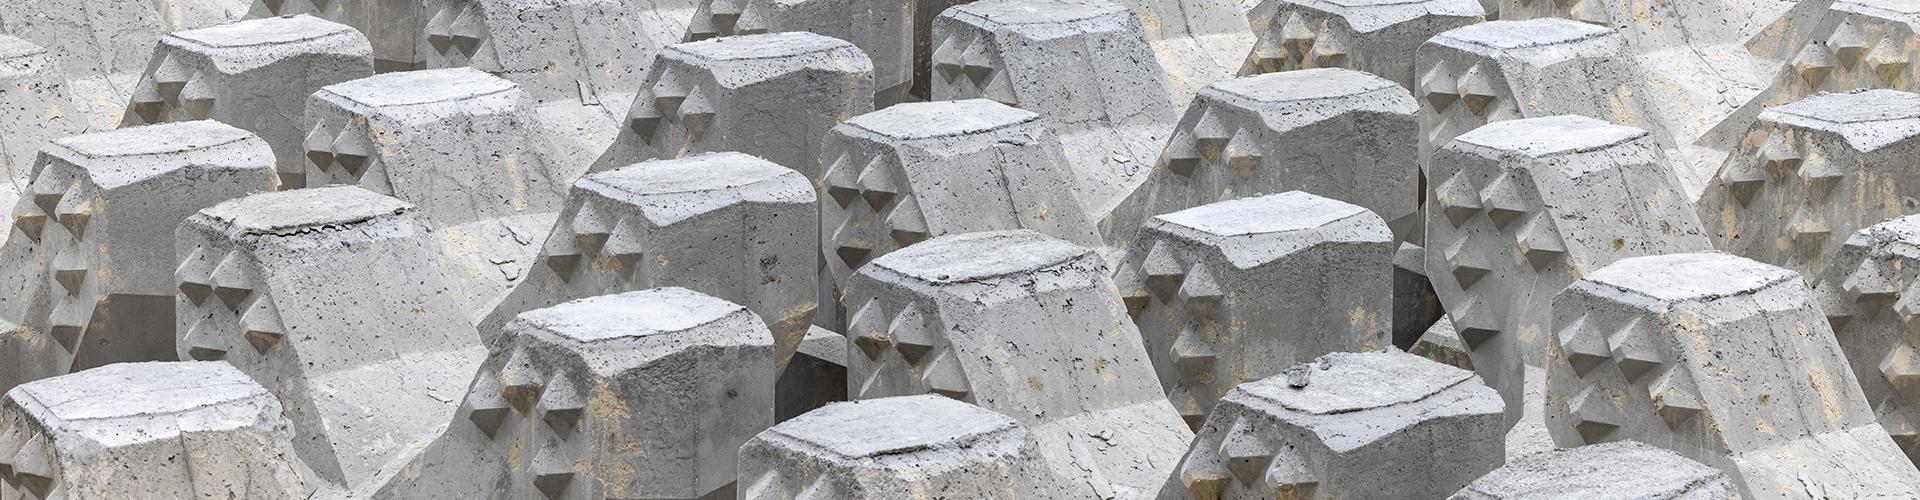 Towards a more sustainable cement industry